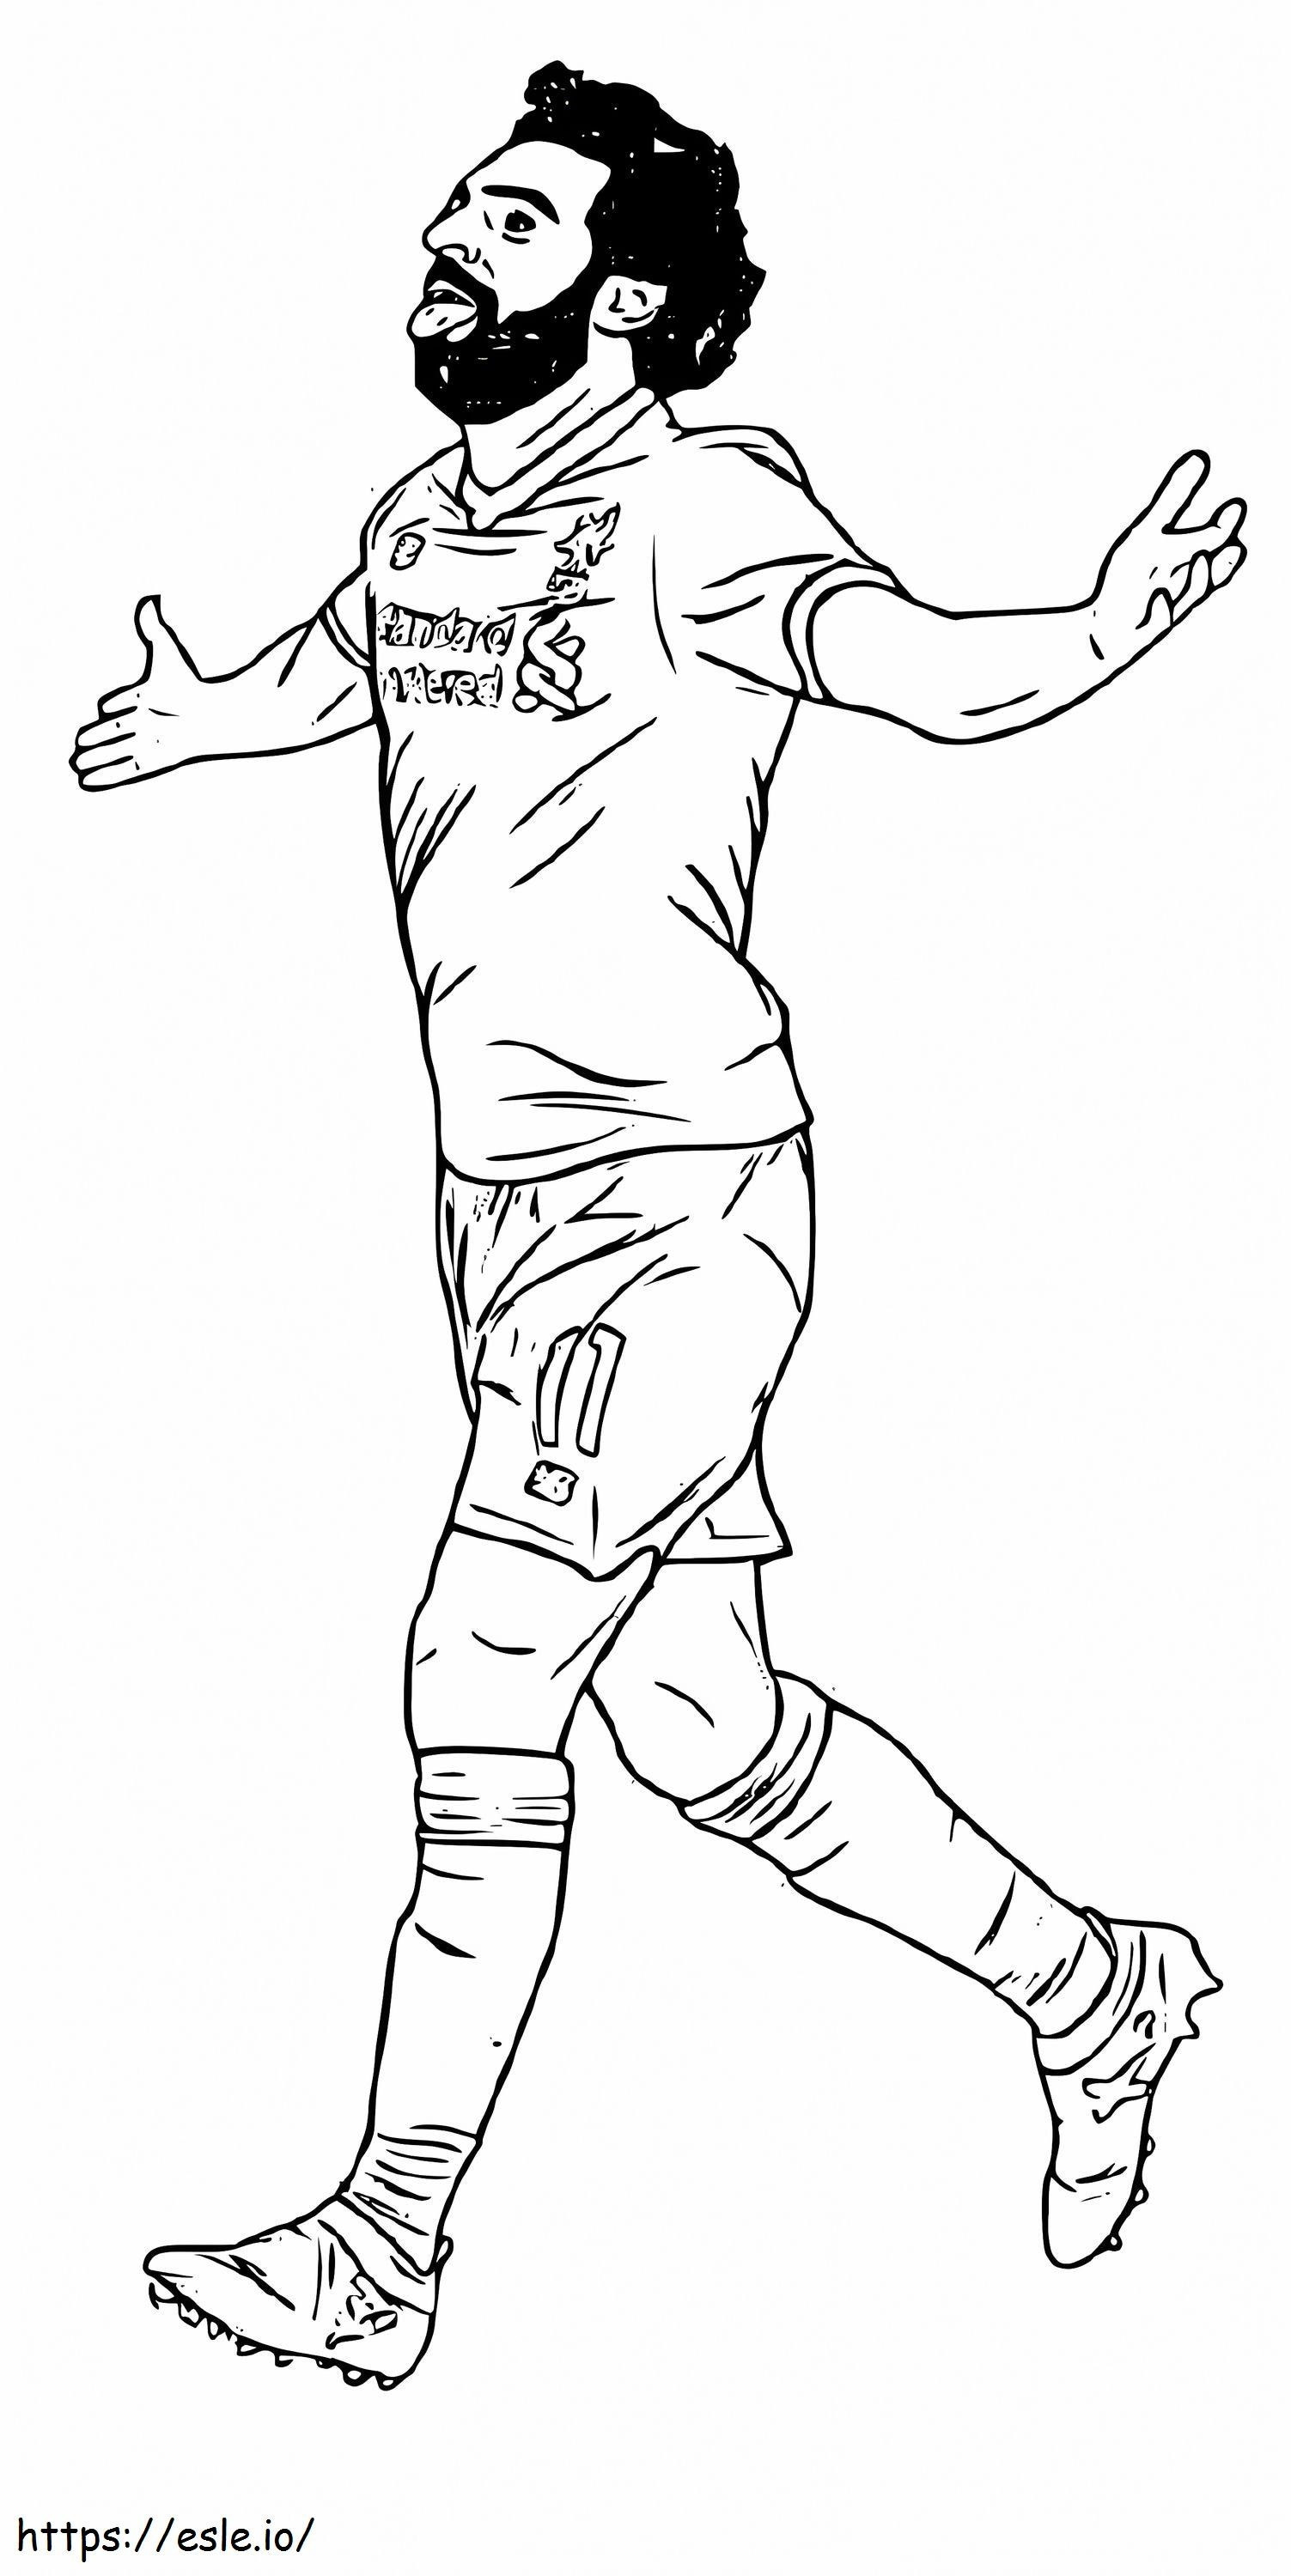 Mohamed Salah coloring page